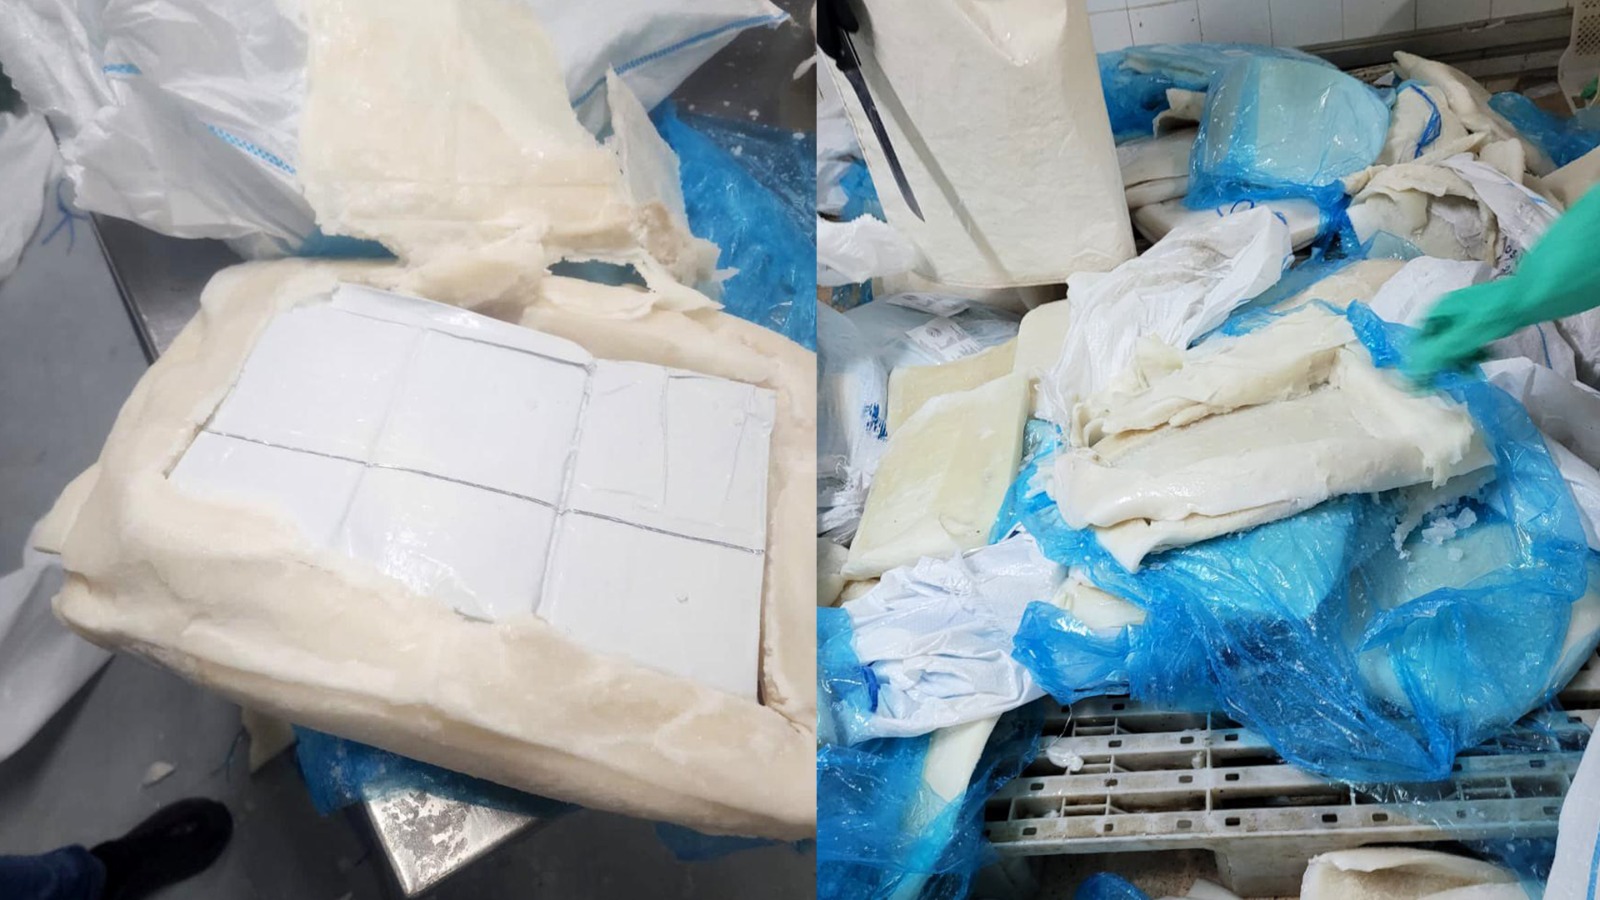 Morocco: Police seizes 1.37 tons of cocaine in Casablanca